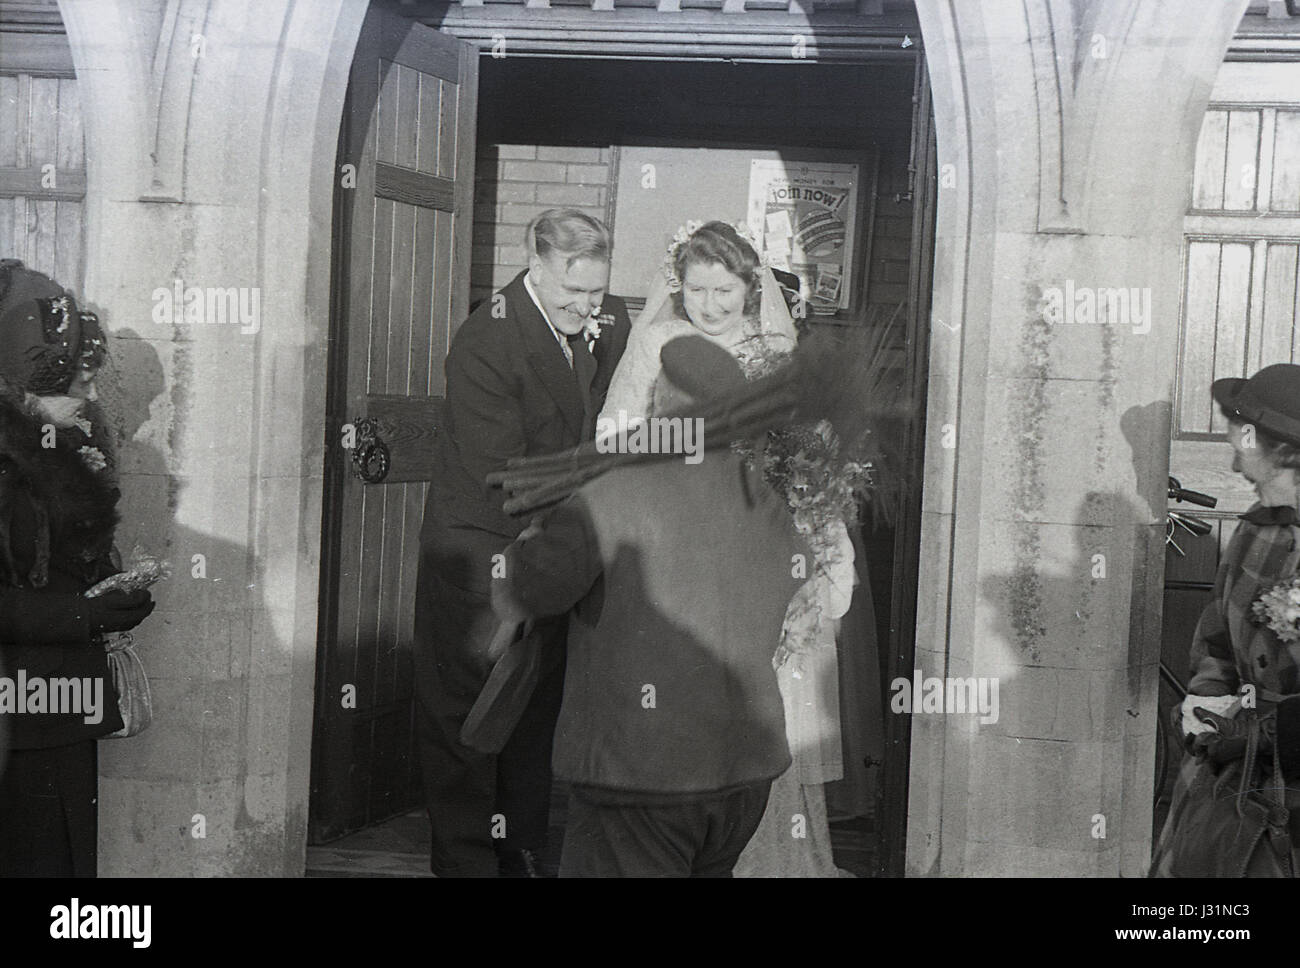 1950s, a newly married couple are greeted at the entrance to the church by a chimney sweep, traditionally a sign of good luck or good fortune, England, UK. Stock Photo